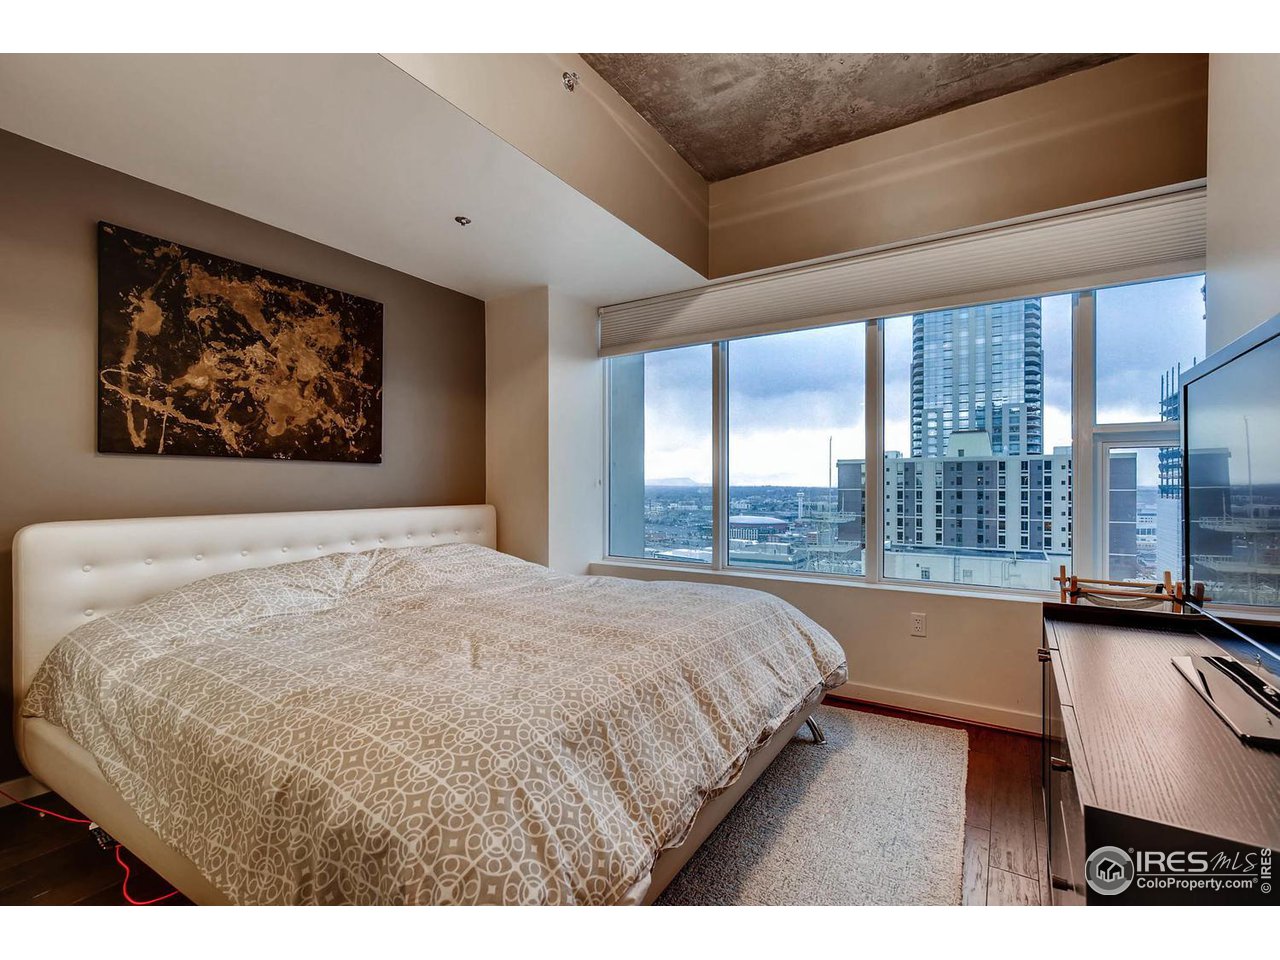 Perched 28 floors above Downtown Denver views from this Master Suite are impeccable.